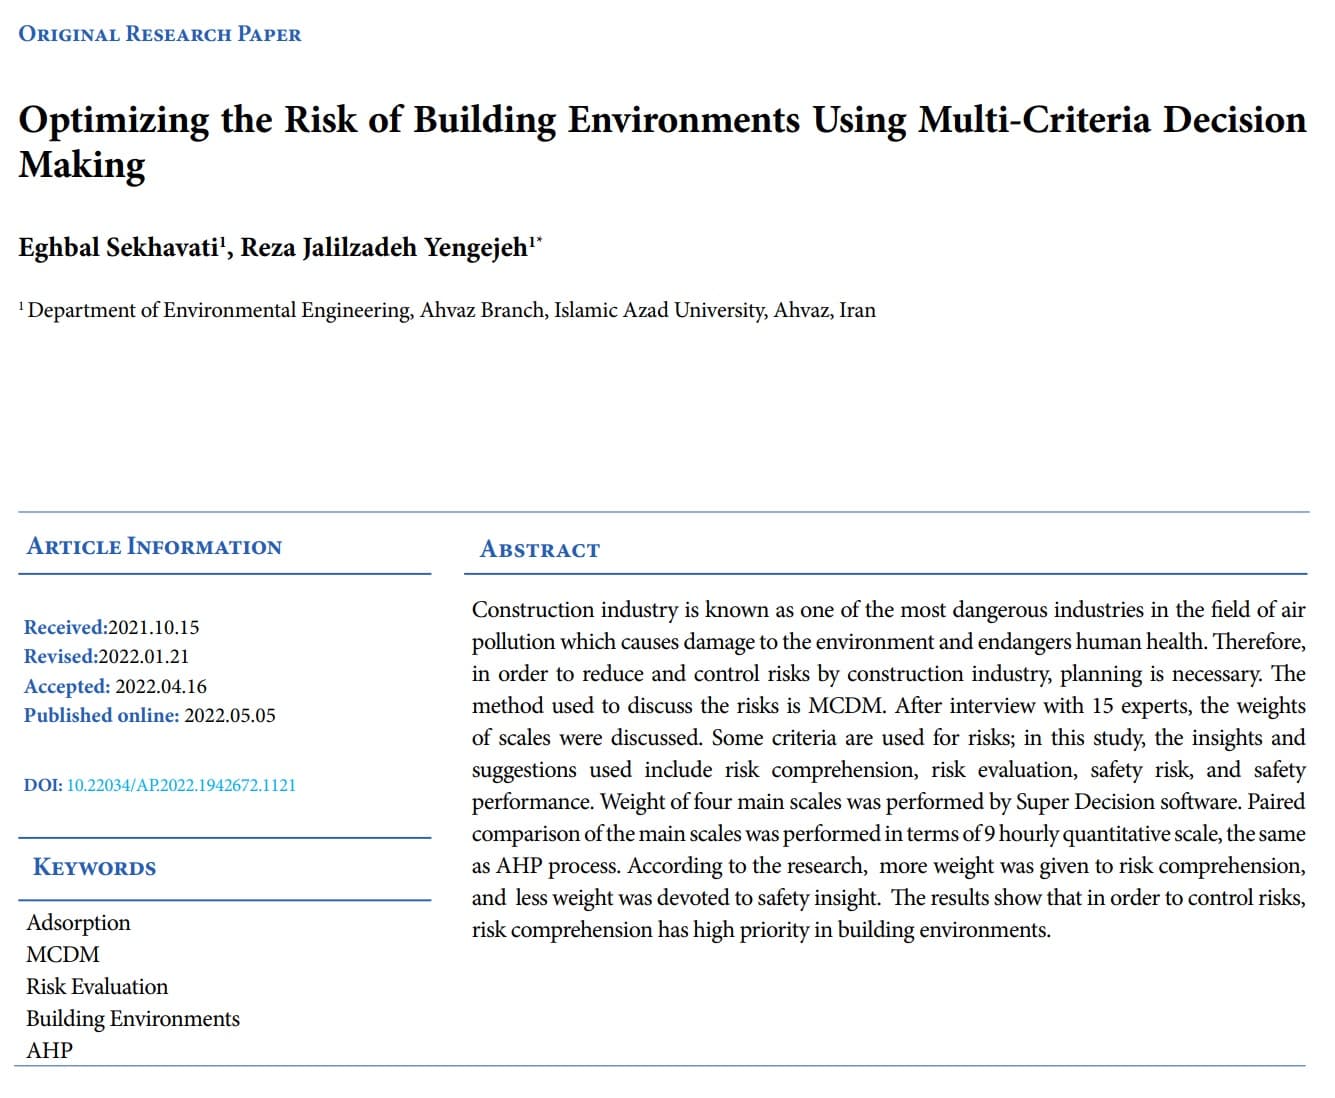 Optimizing the Risk of Building Environments Using Multi-Criteria Decision Making